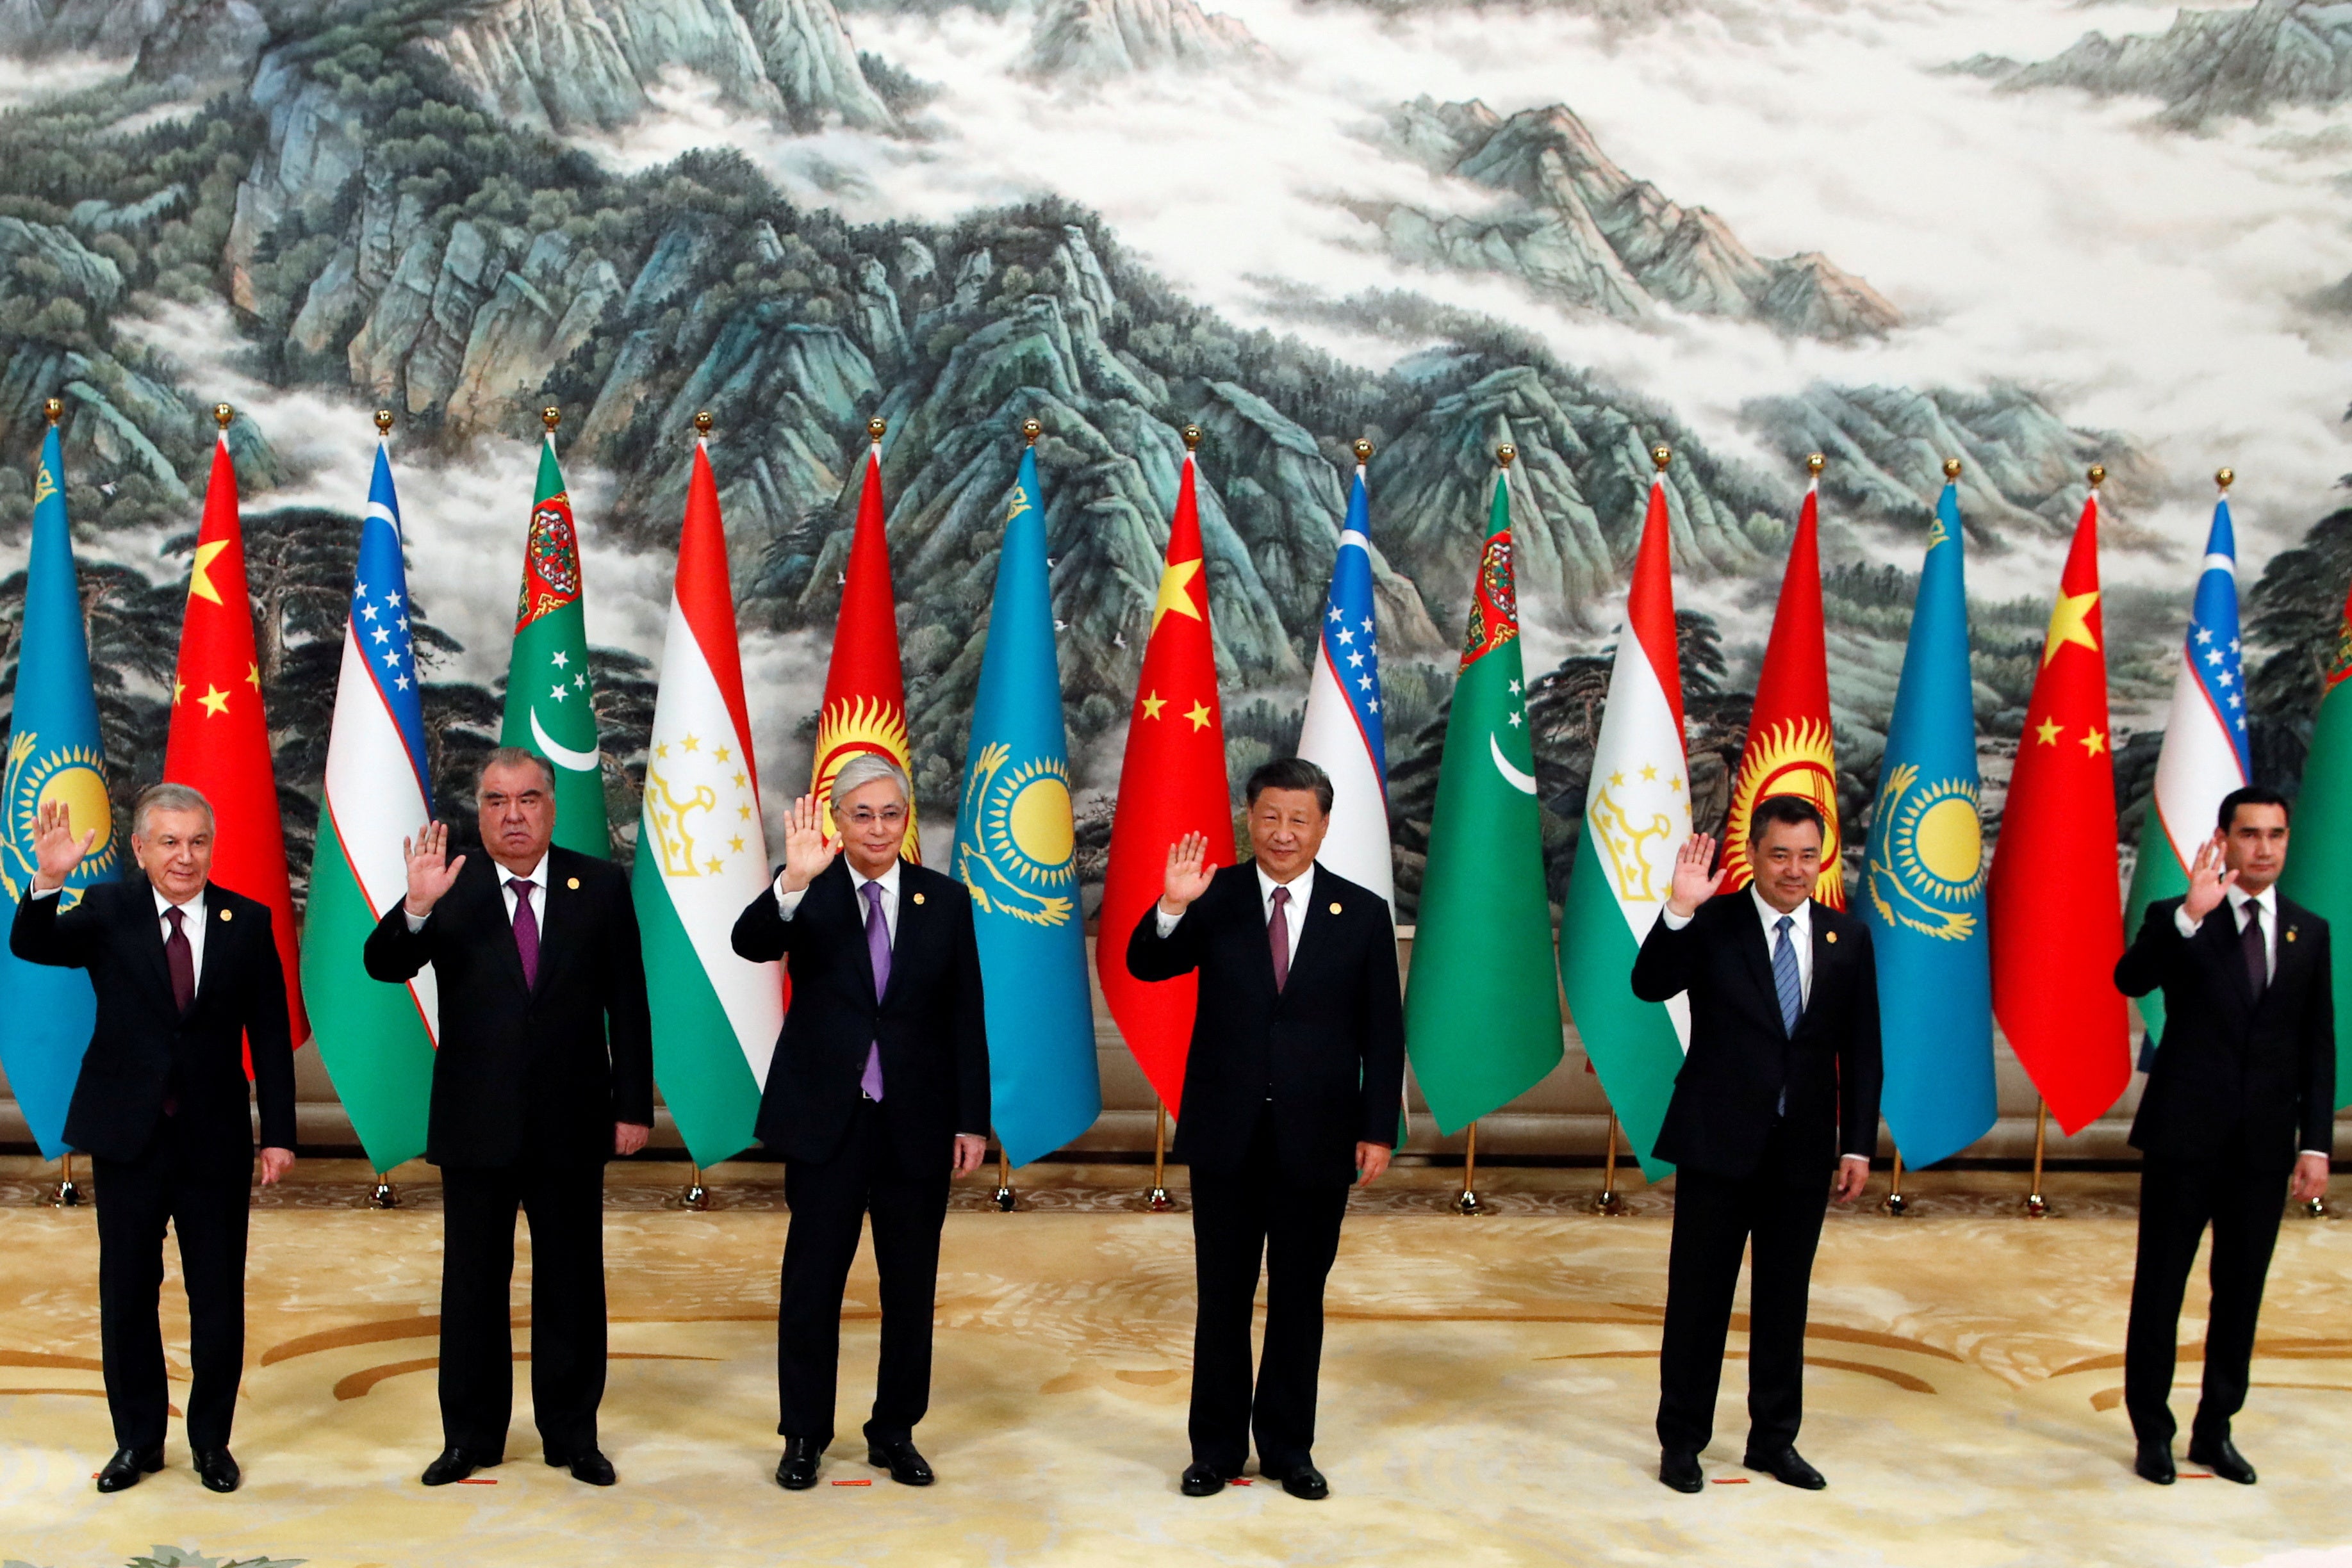 group photo session during the China-Central Asia Summit in Xian, Shaanxi province